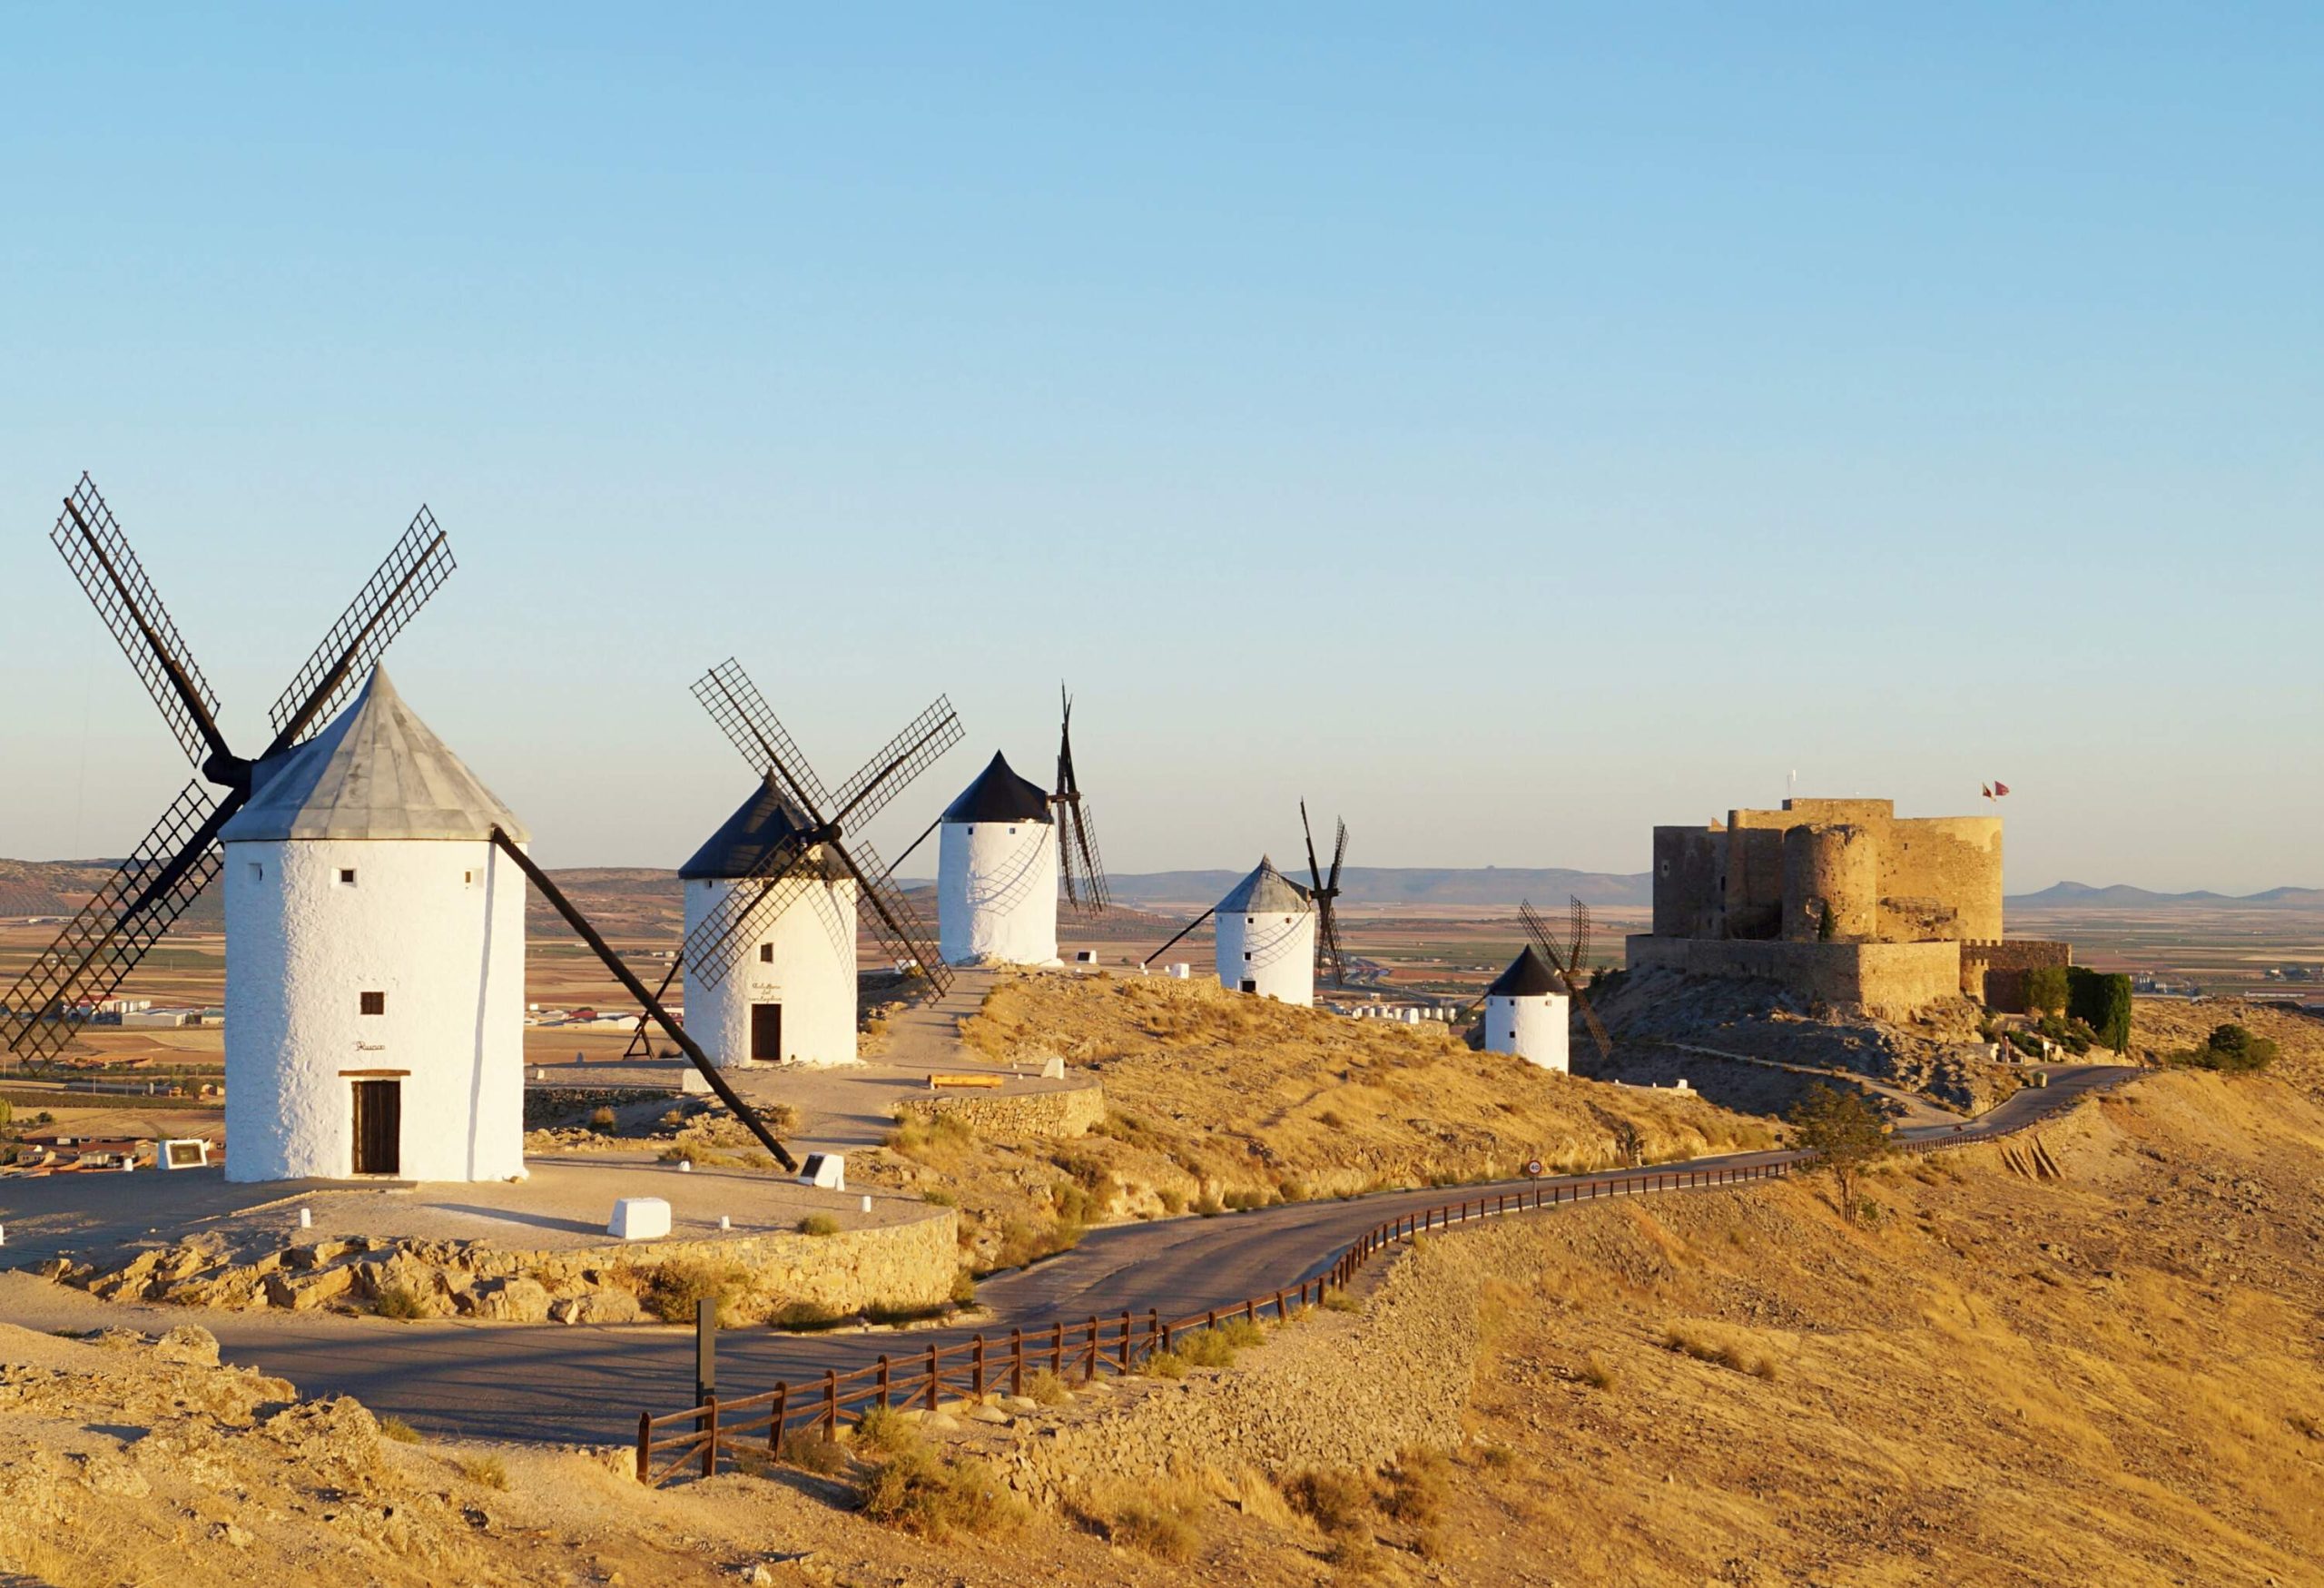 A row of windmills with white towers and conical roofs along the side of a road.